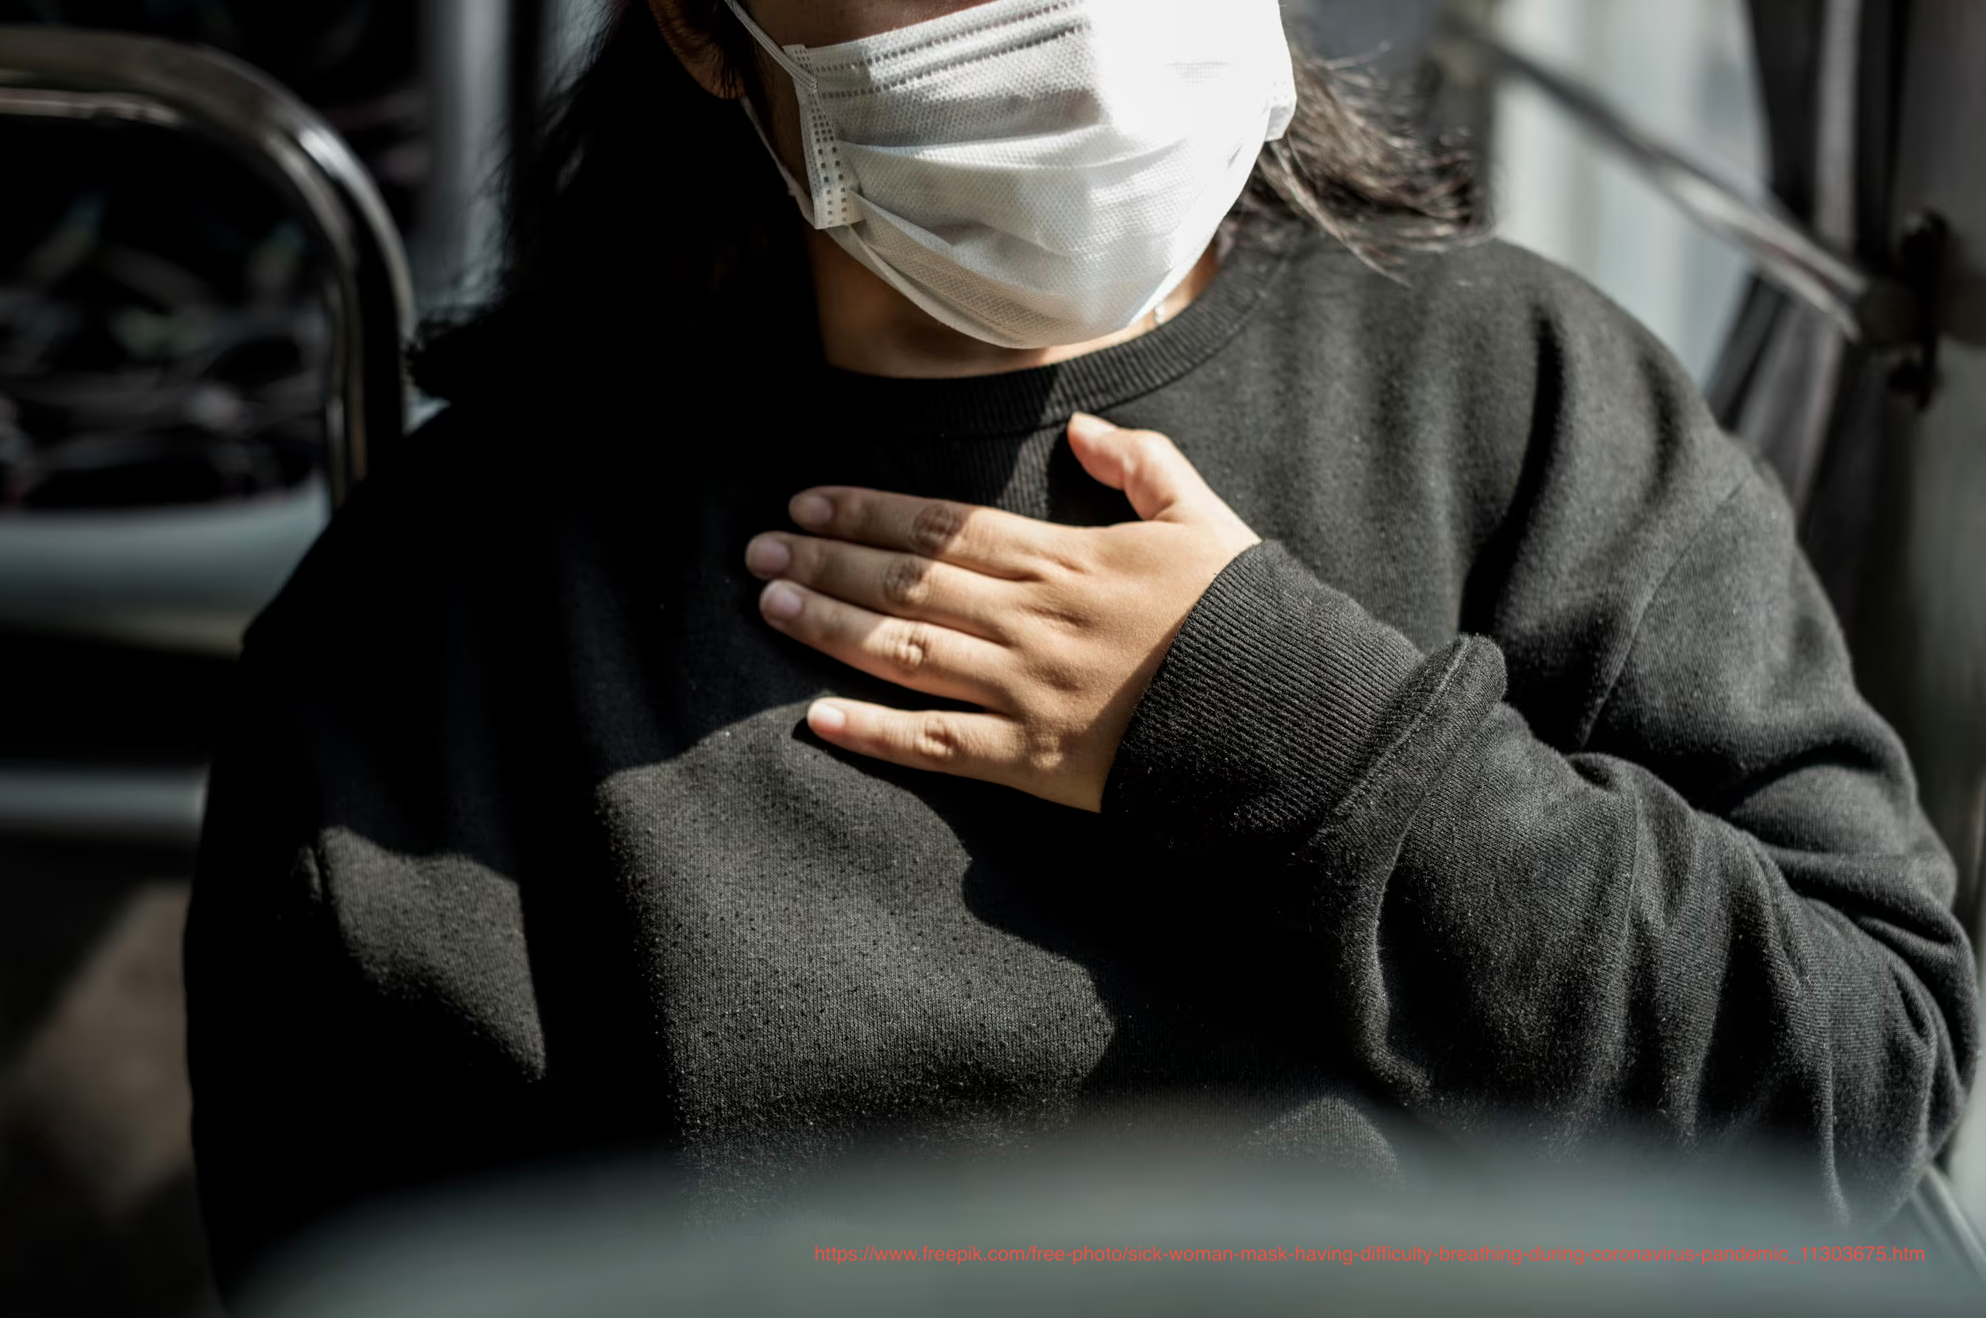 This figure is retrieved from https://www.freepik.com/free-photo/sick-woman-mask-having-difficulty-breathing-during-coronavirus-pandemic_11303675.htm